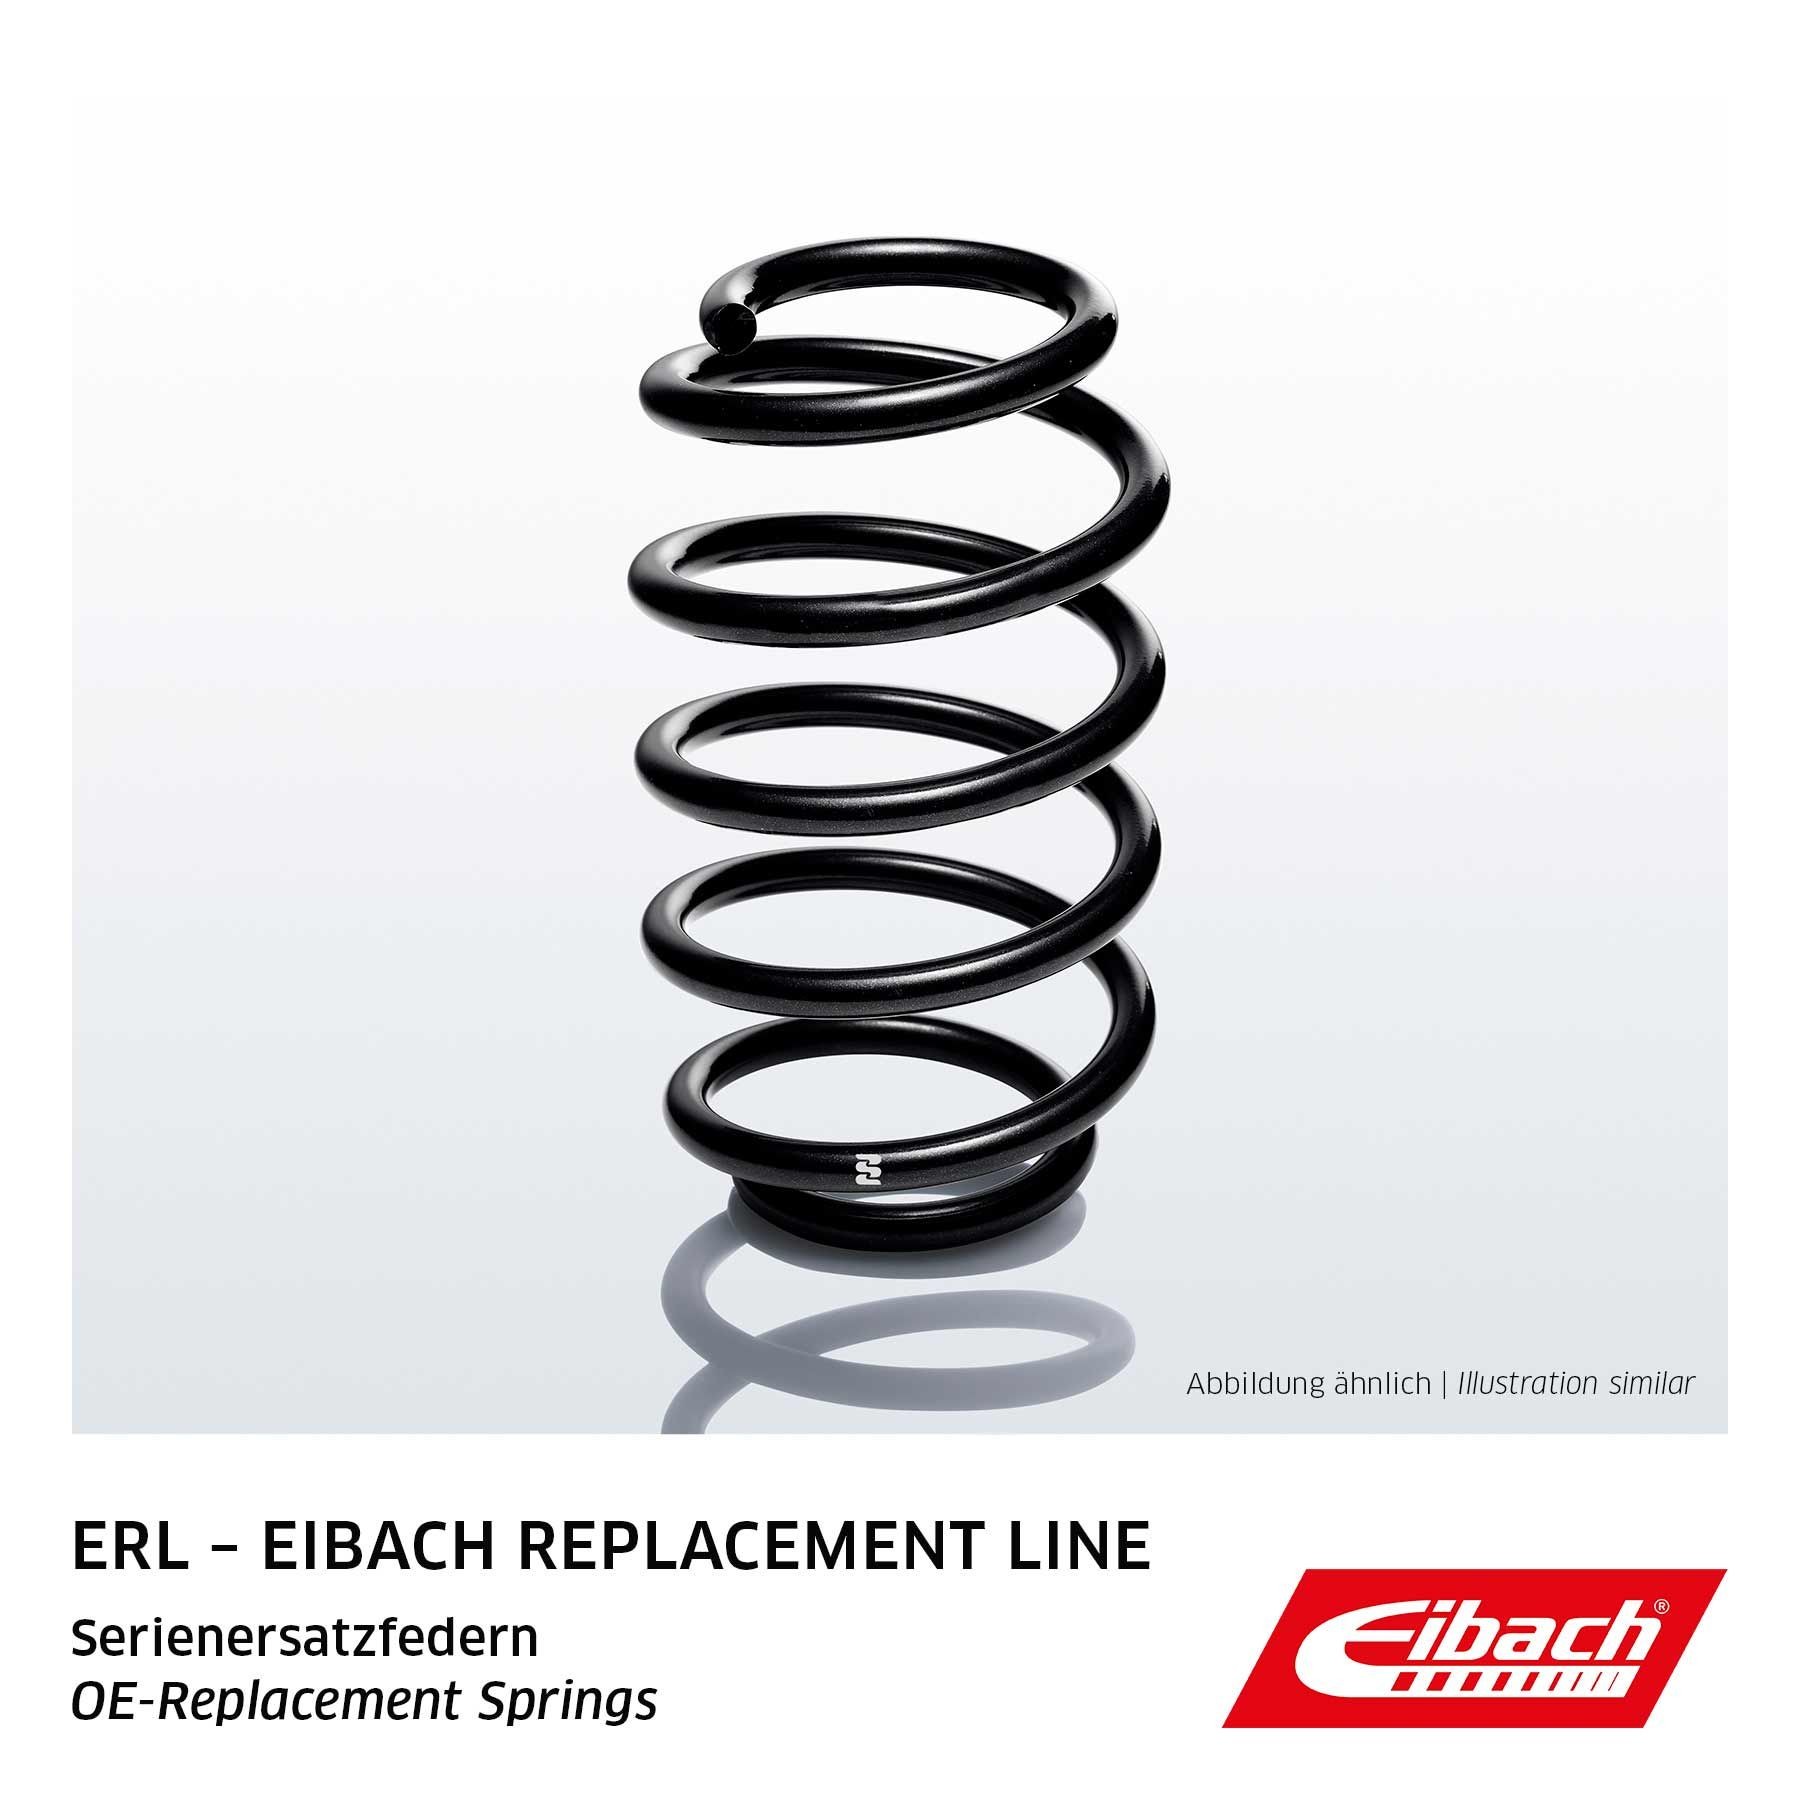 1.25/1.4/1.6 from 2008-2013 B299 Continental Direct Rear Coil Spring for Ford Fiesta MK6 